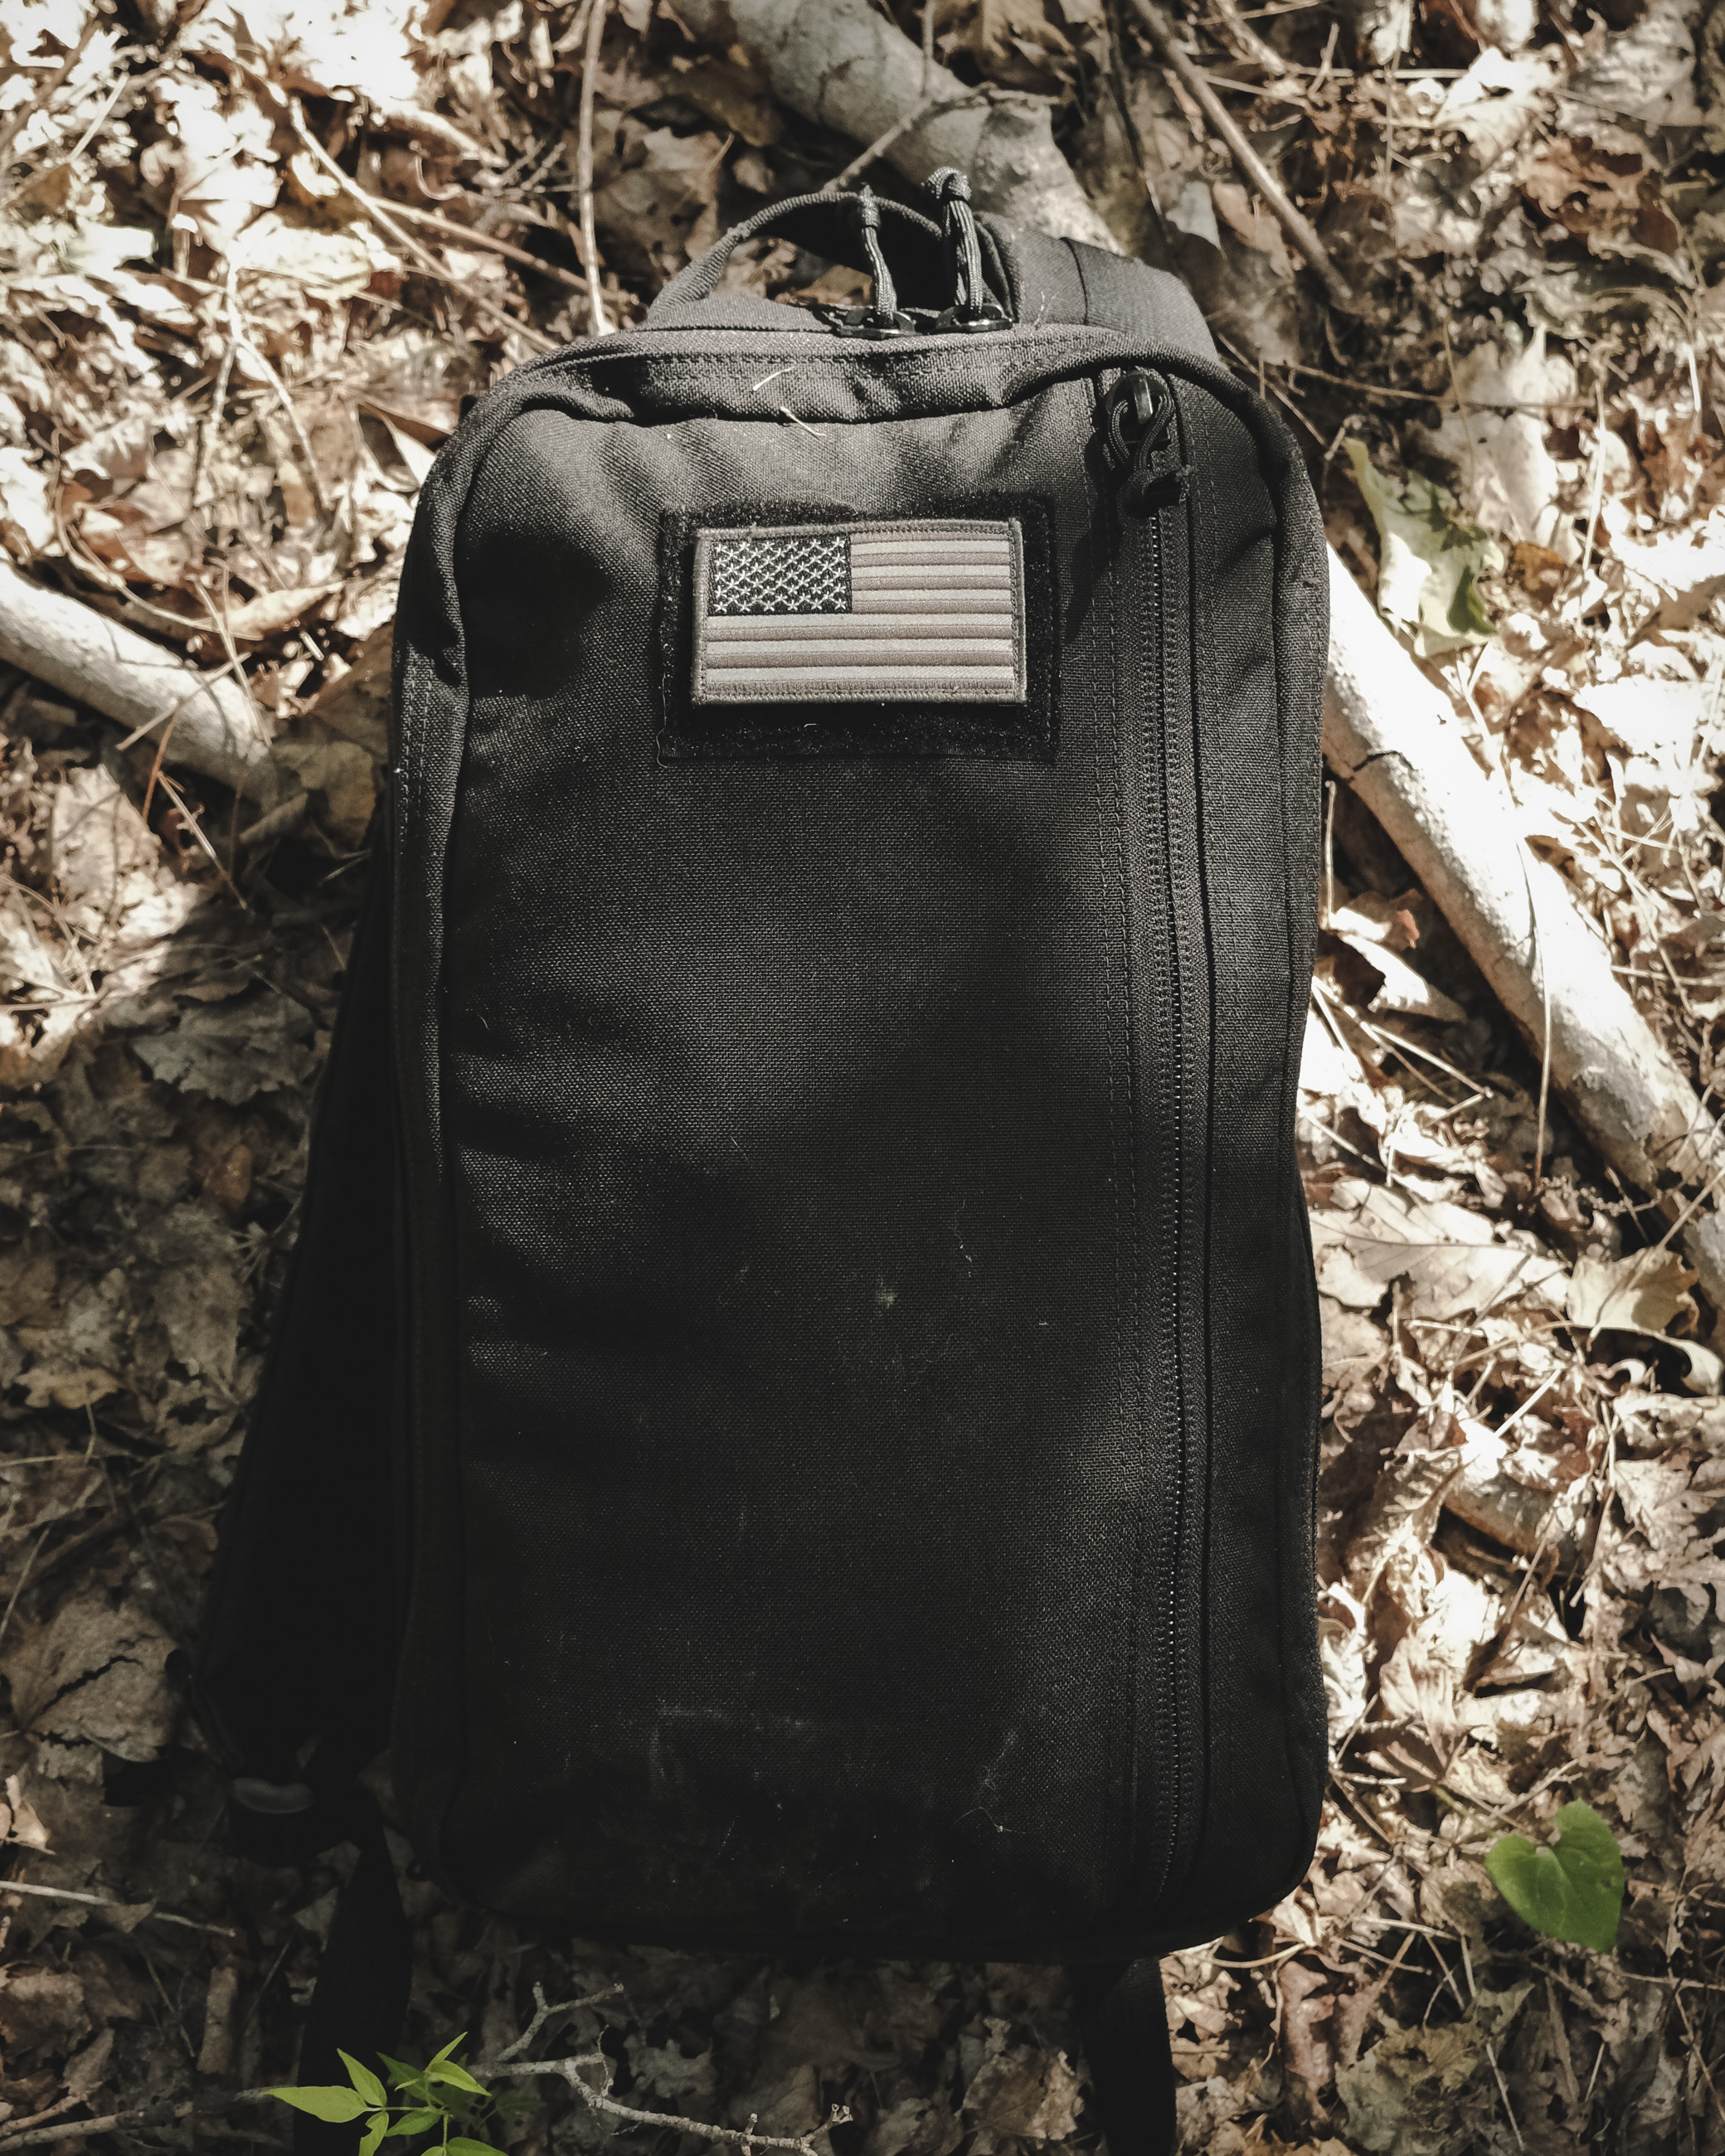 Recycled Firefighter 12 Hour Backpack Review